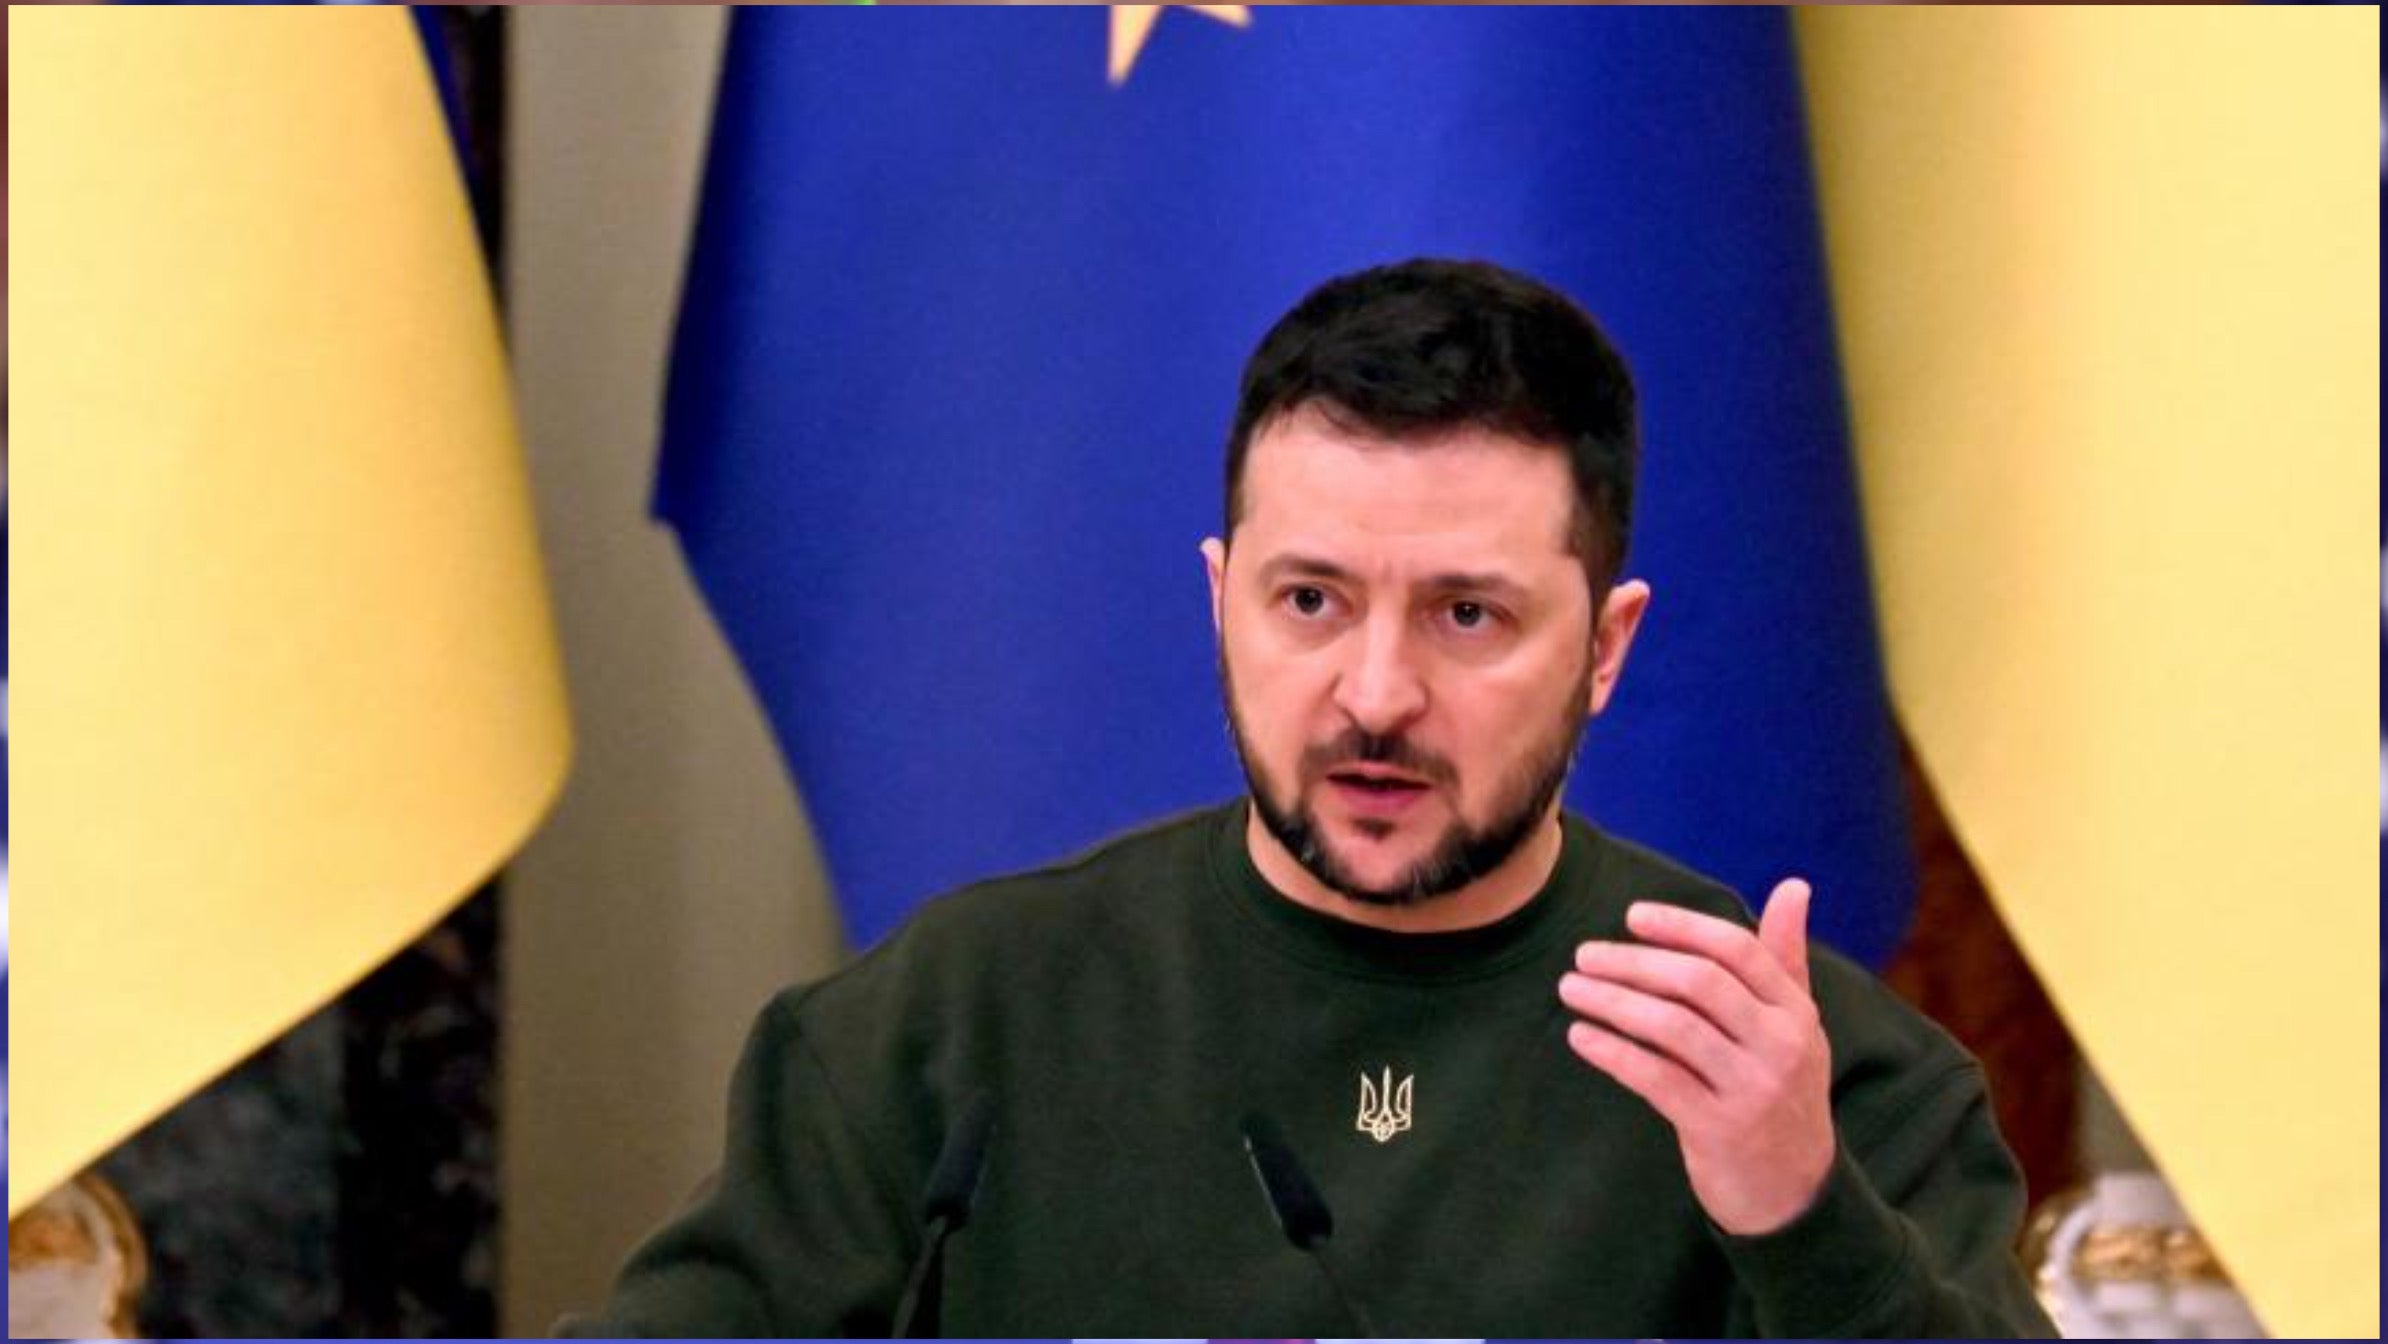 War in Ukraine: Zelensky calls for tanks and long-range missiles to stop the evil, Magnate Daily